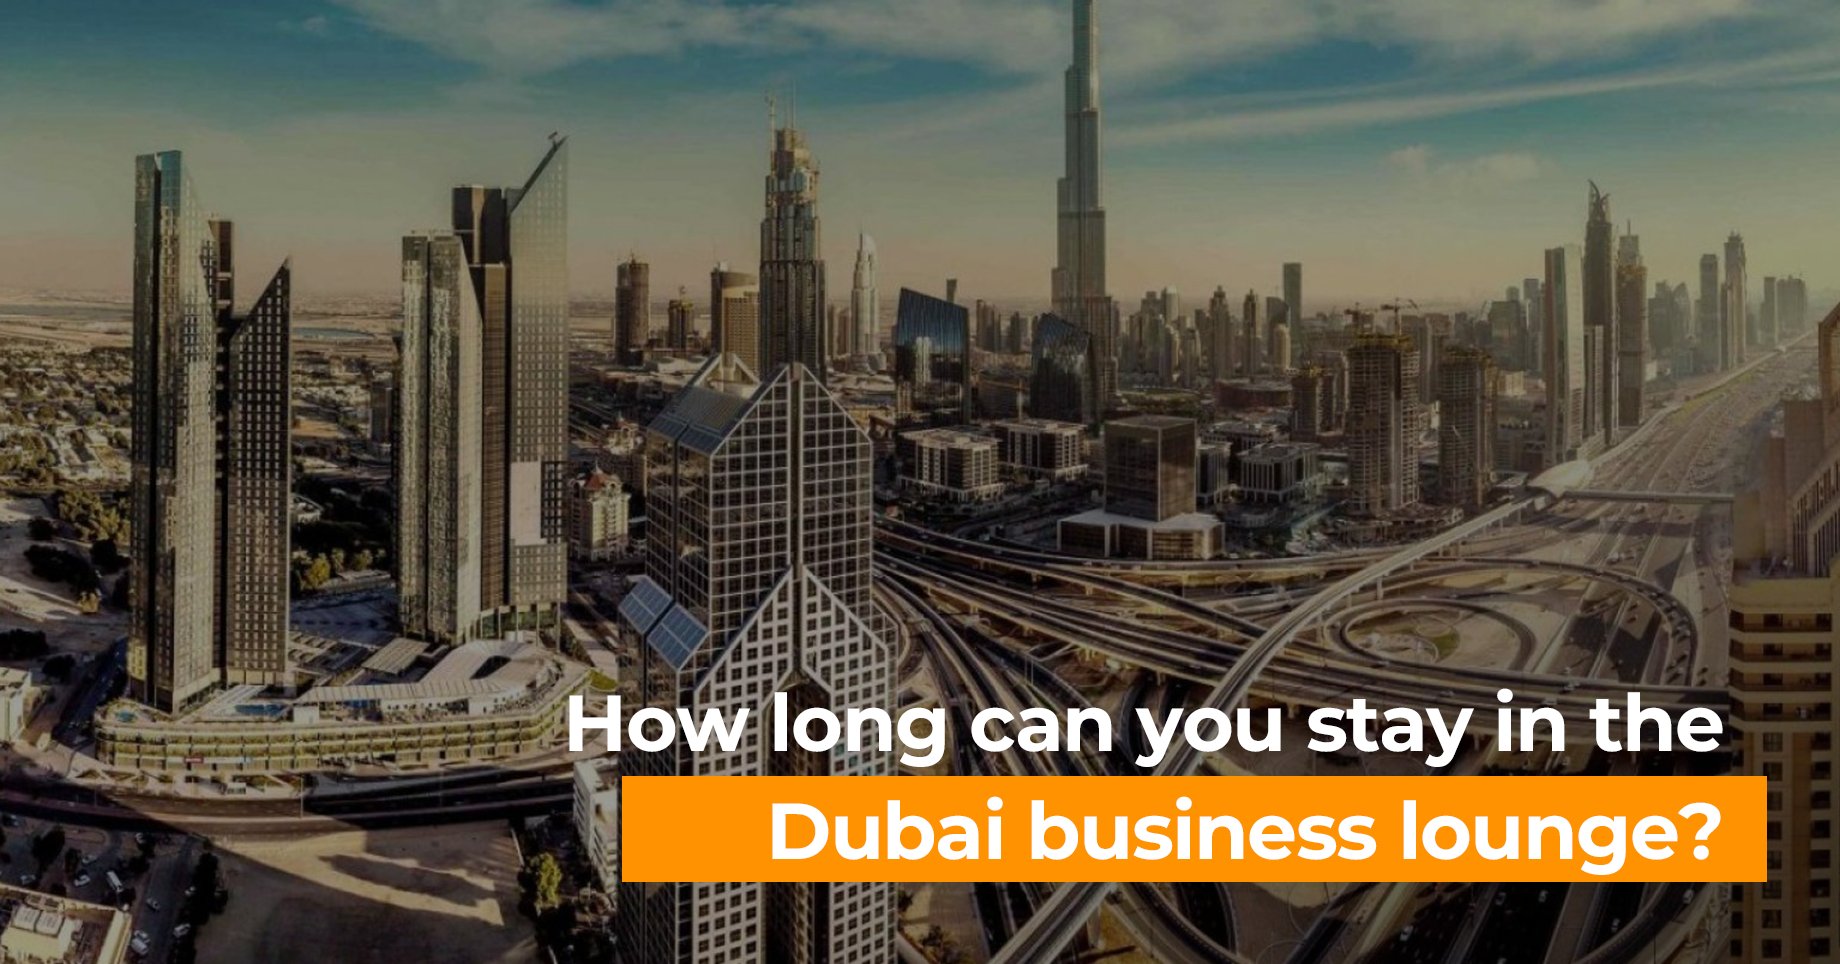 How long can you stay in the Dubai business lounge?